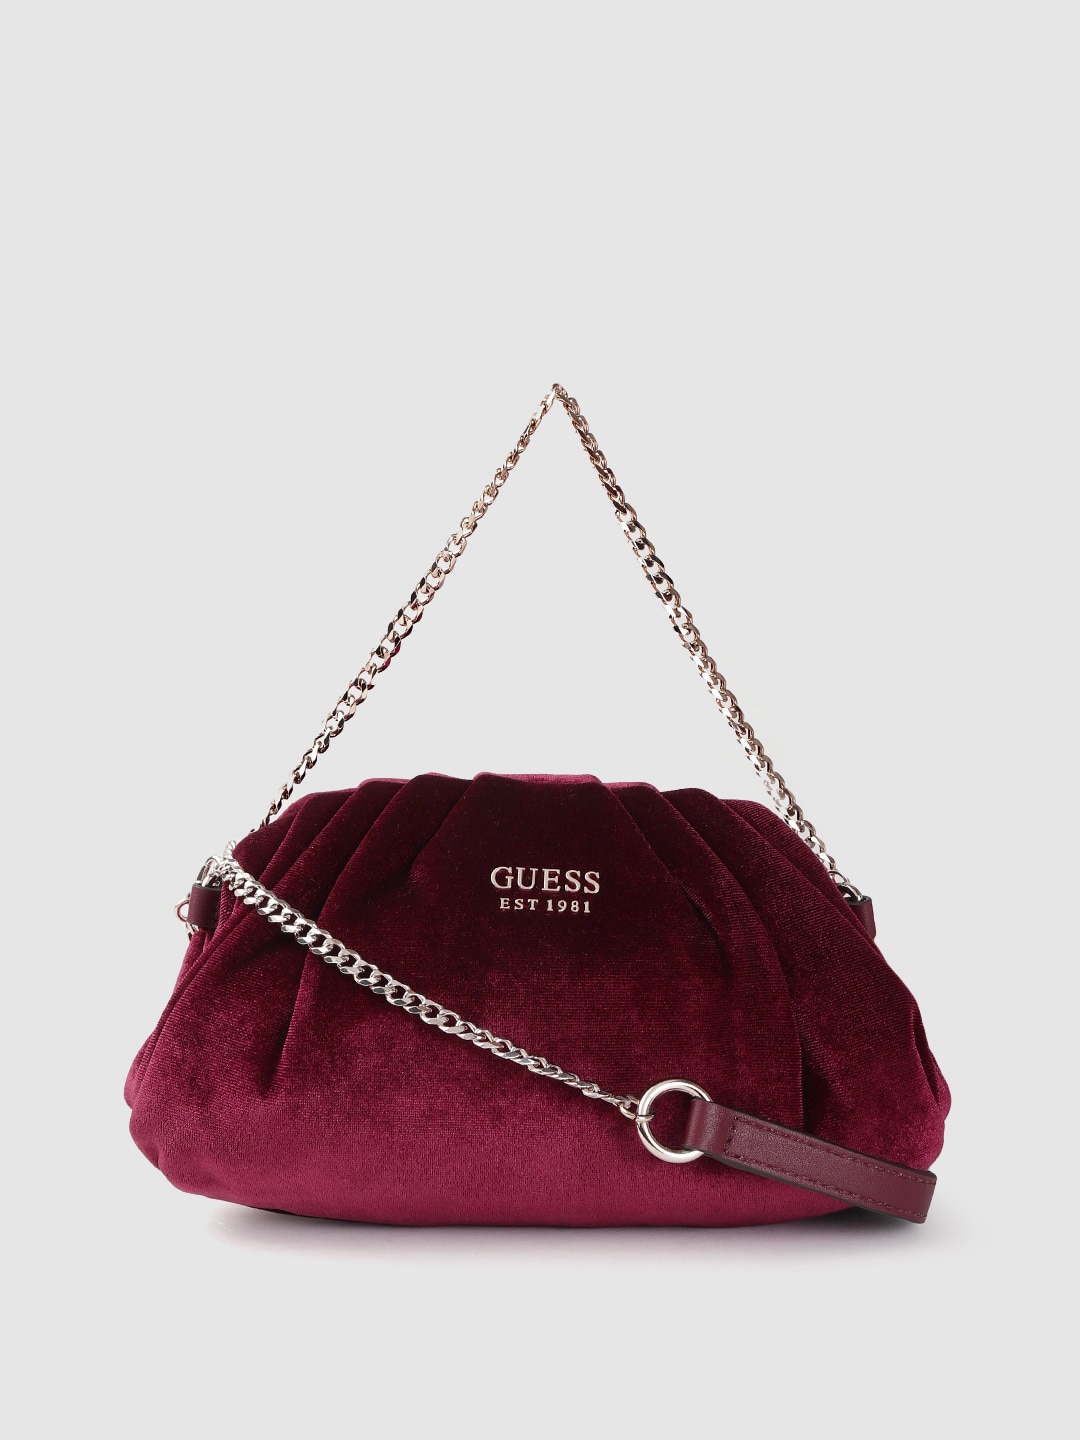 GUESS Women Maroon Solid Structured Handheld Bag Price in India